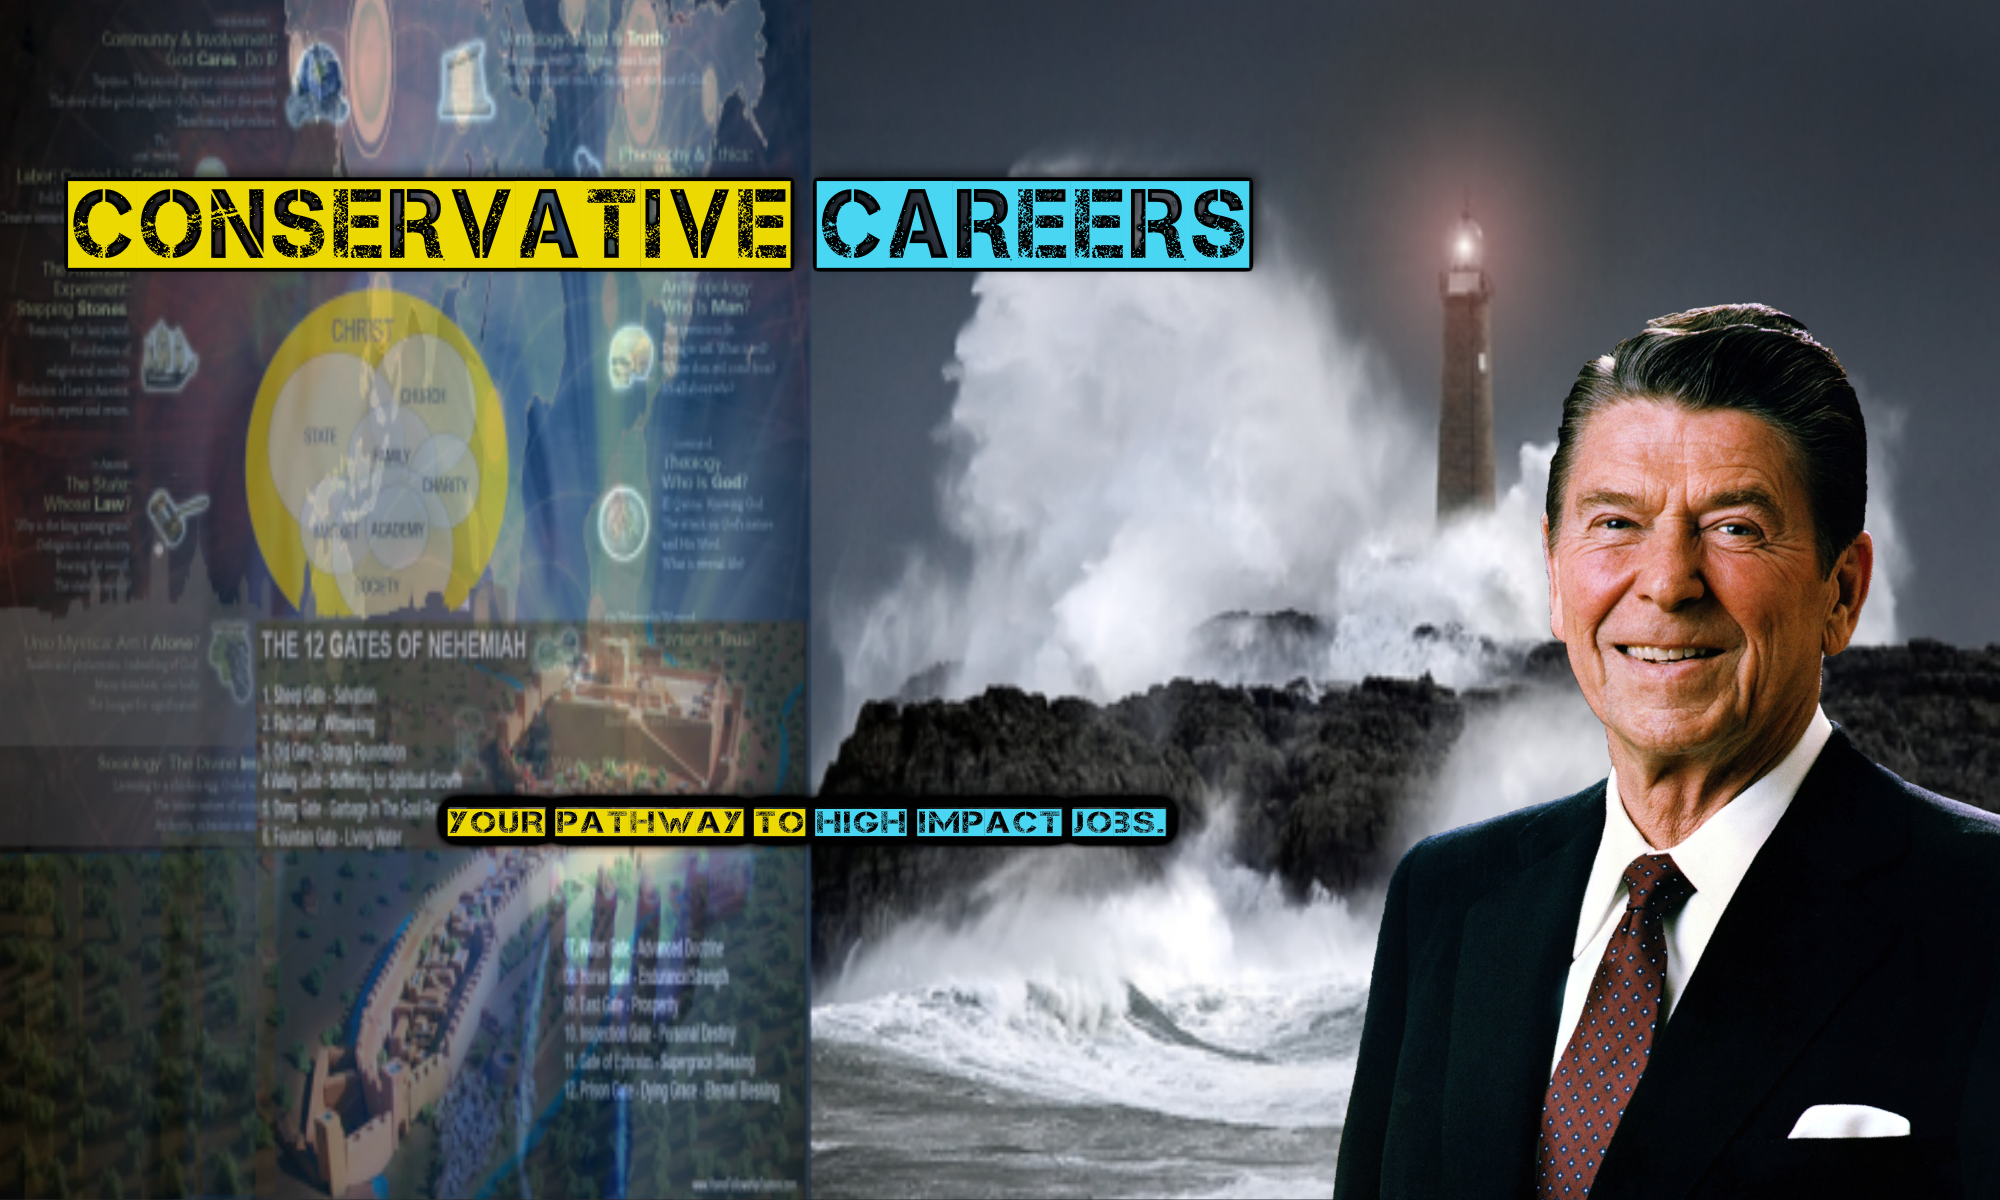 Conservative Careers